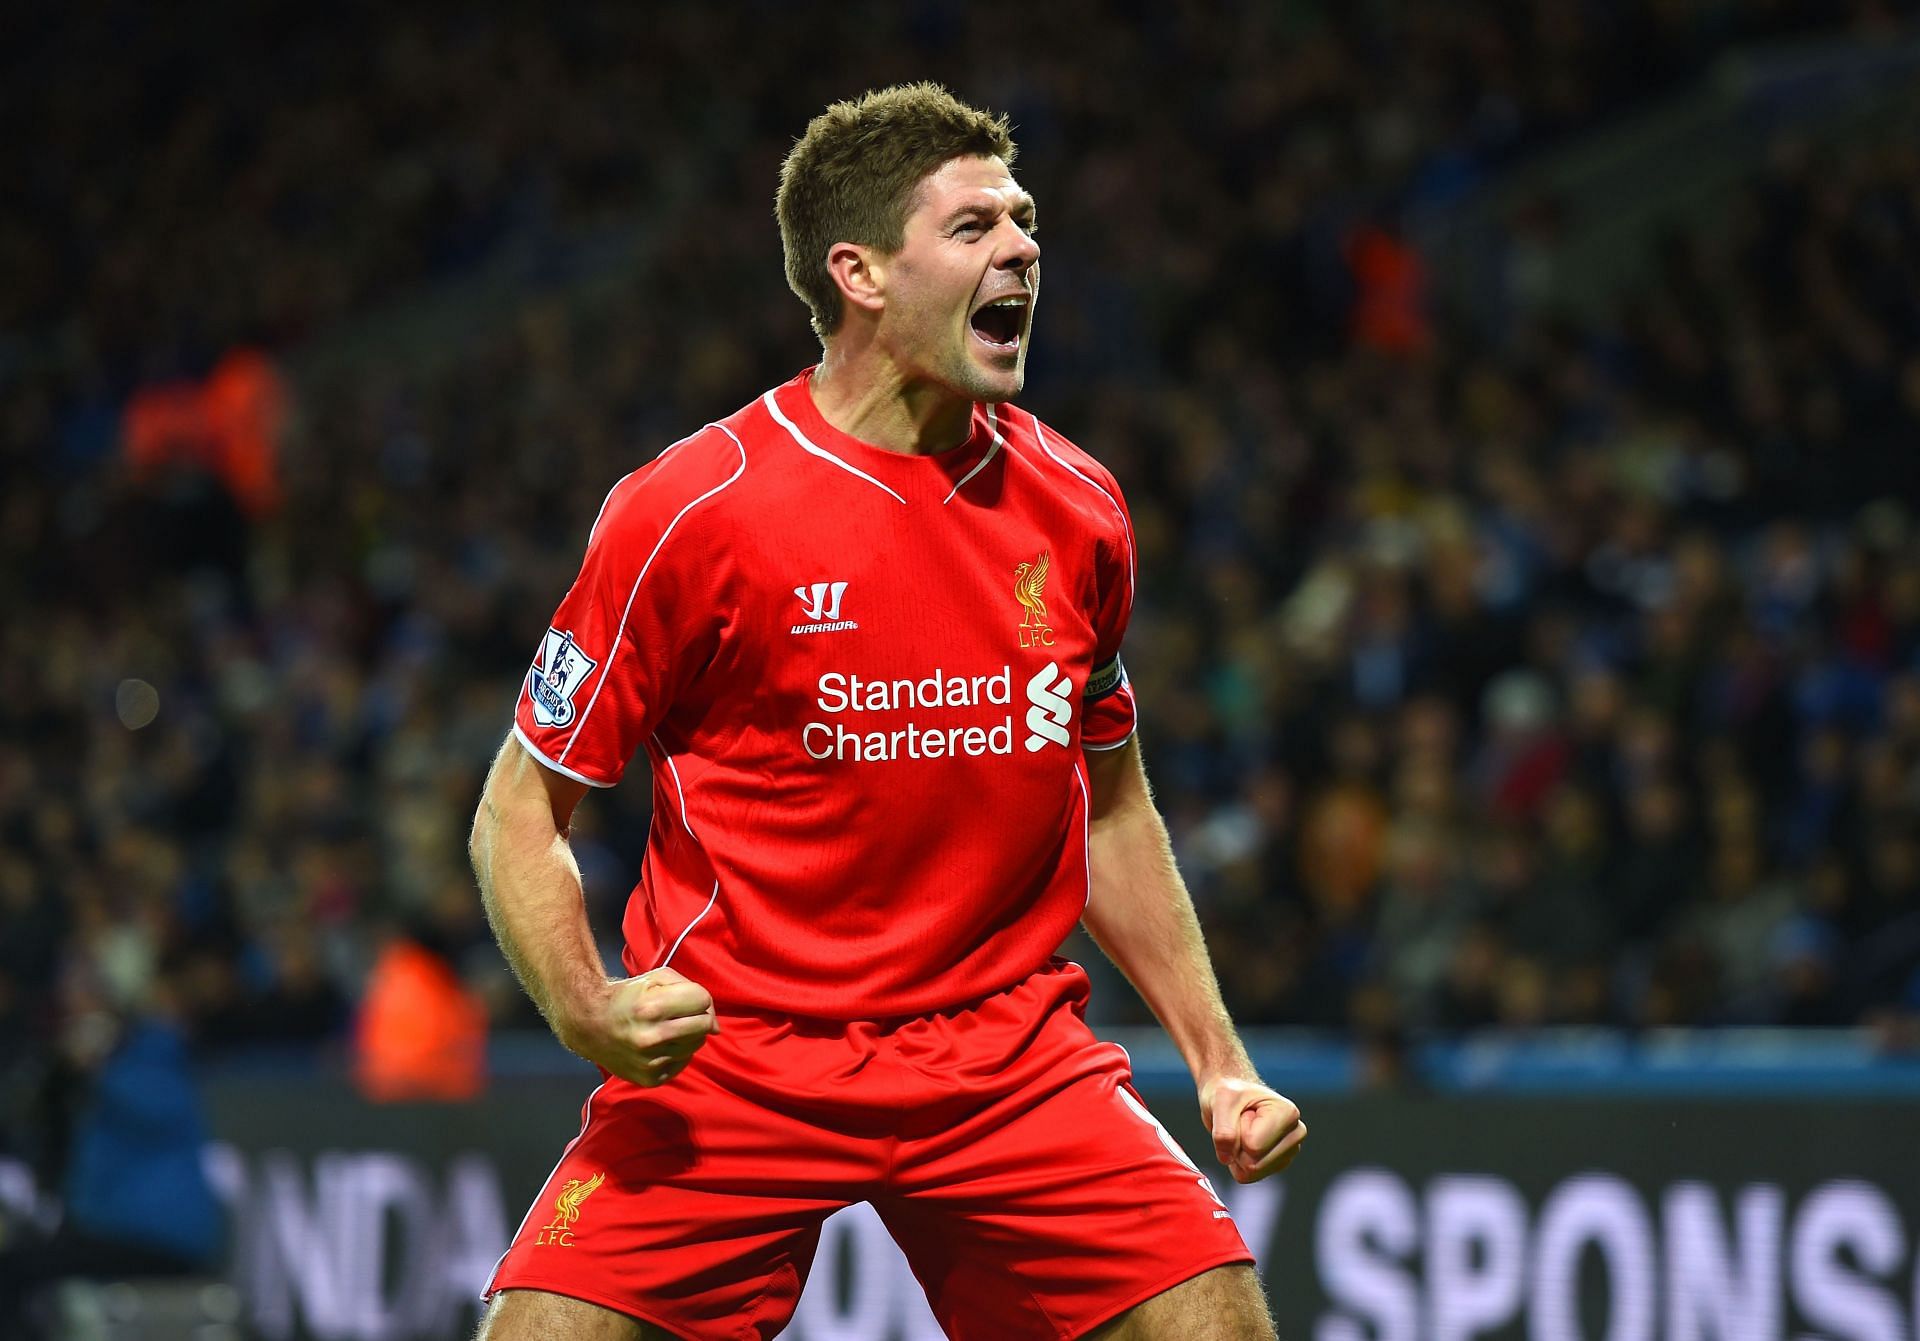 Steven Gerrard has scored 30 goals in the Champions League for Liverpool